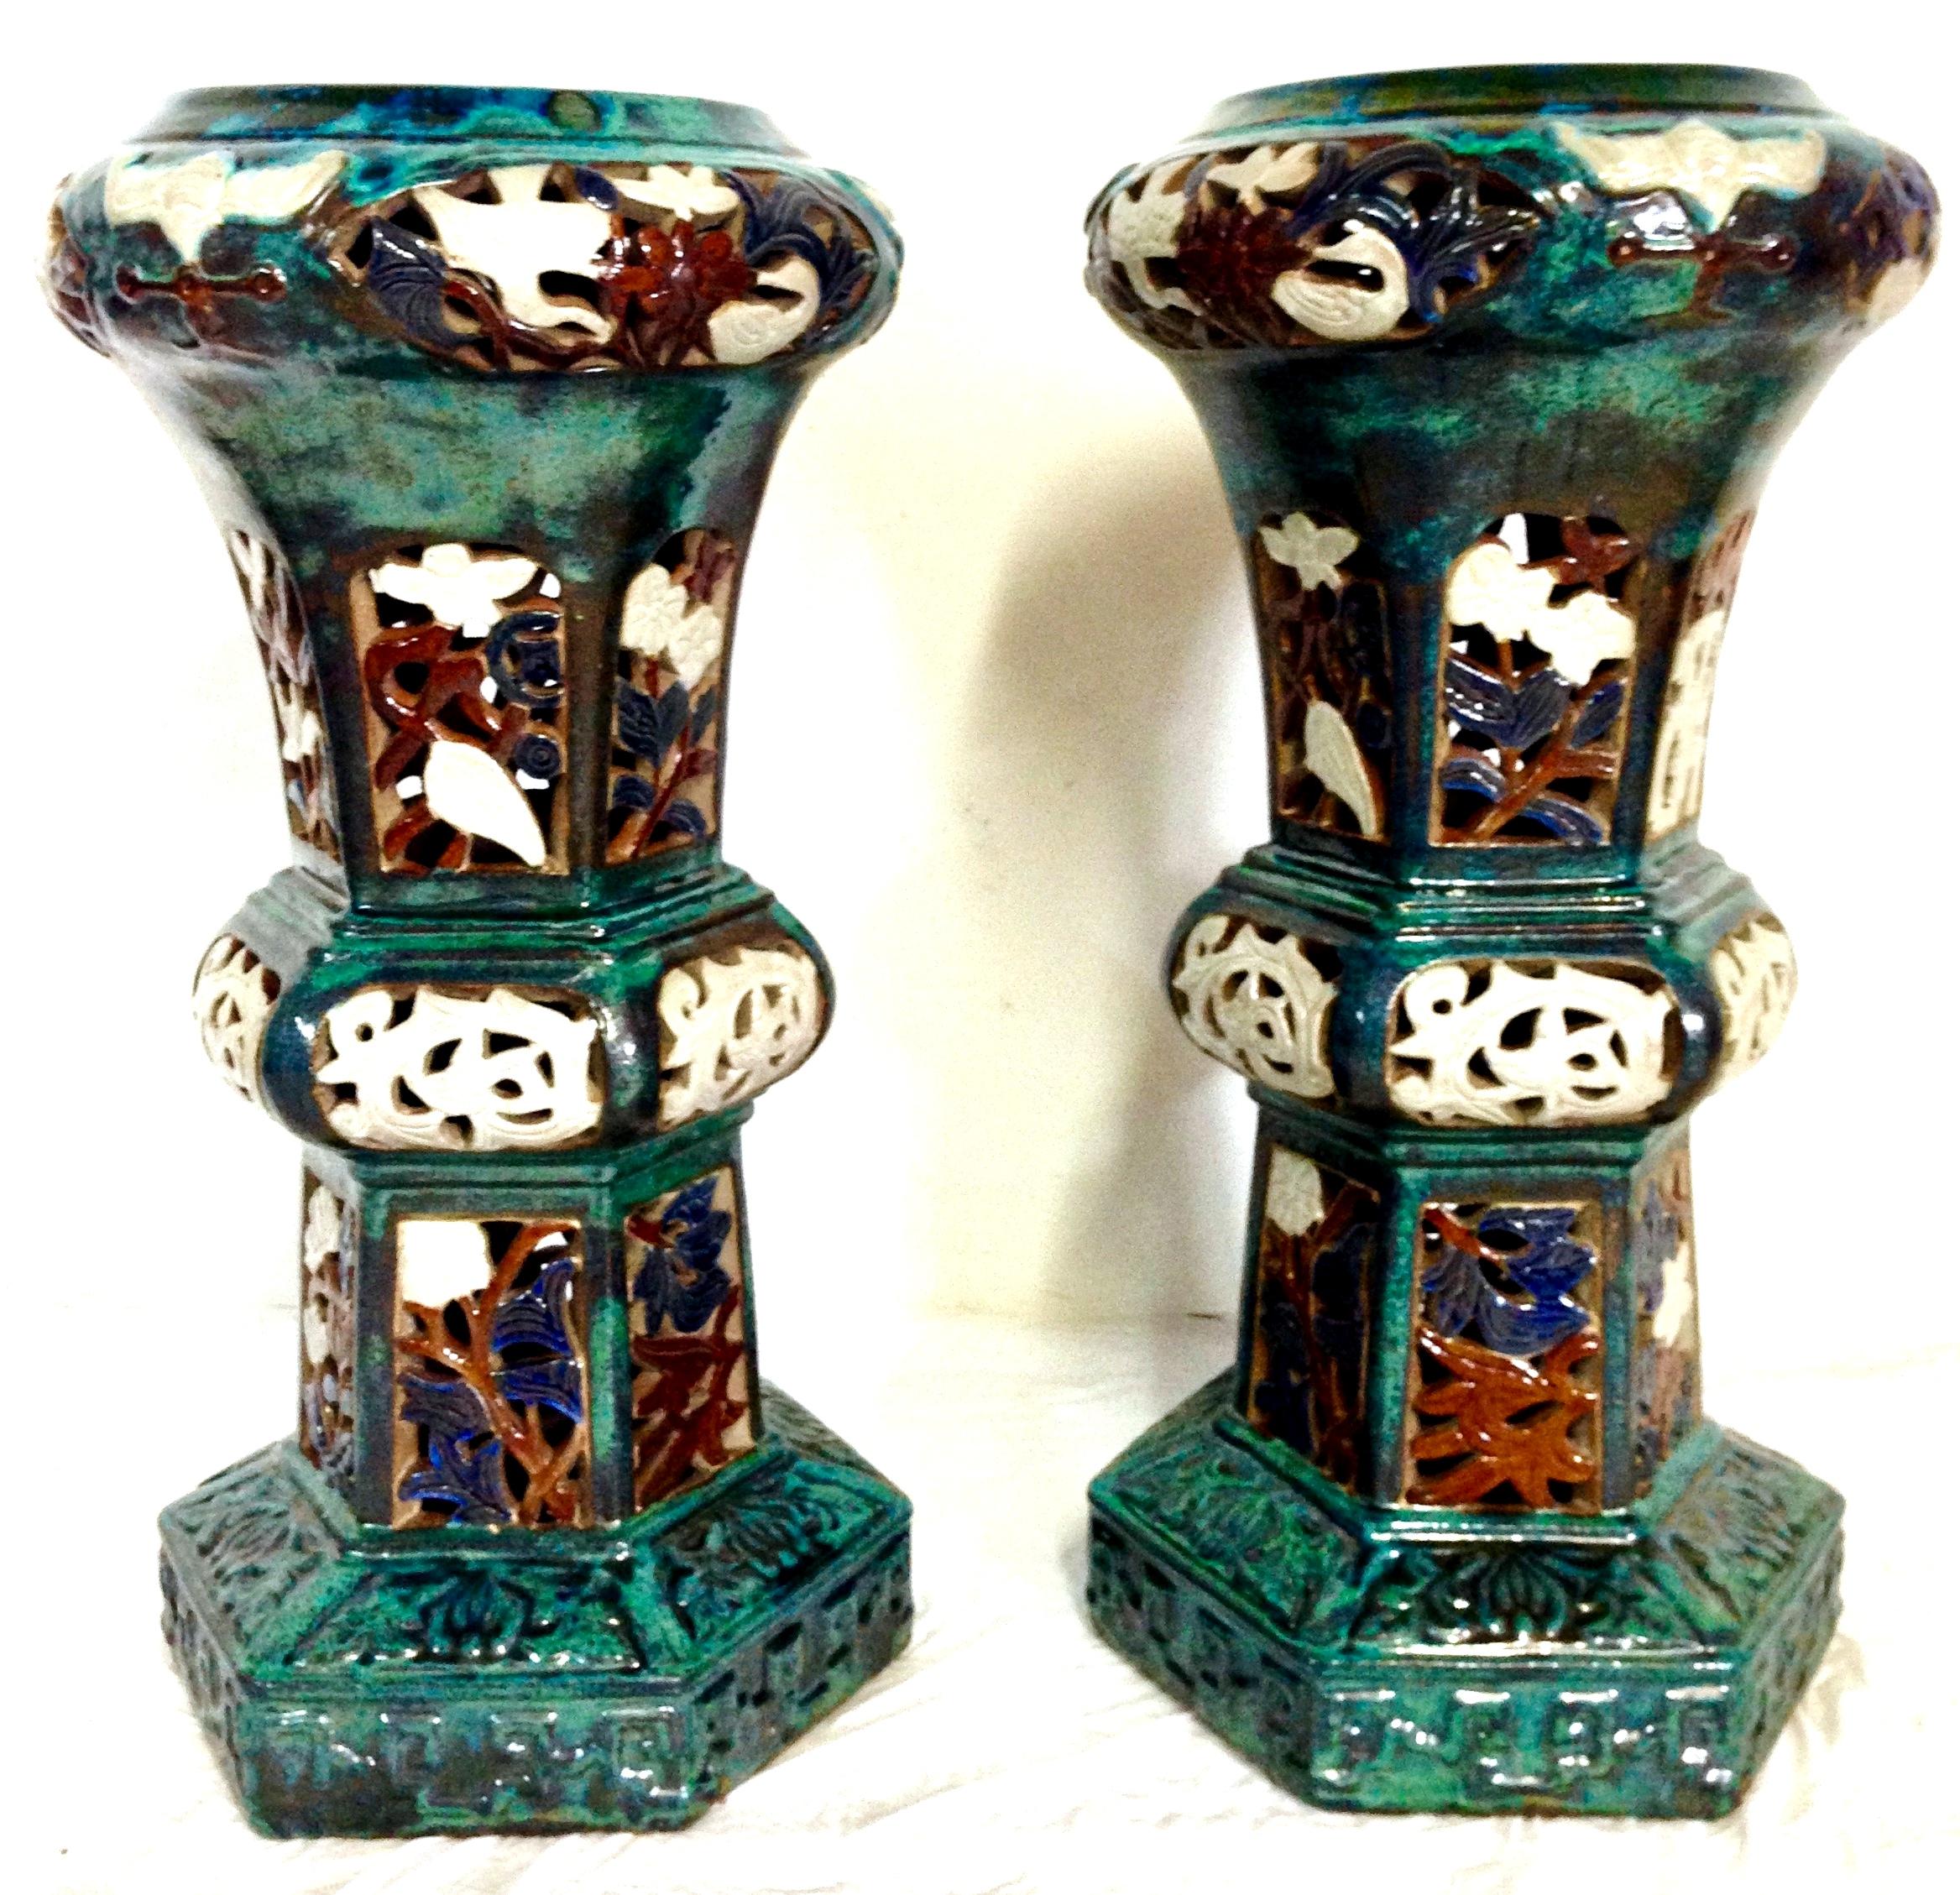 21st century pair of monumental ceramic glaze Chinese export garden pedestals, plant stands. Executed in a 